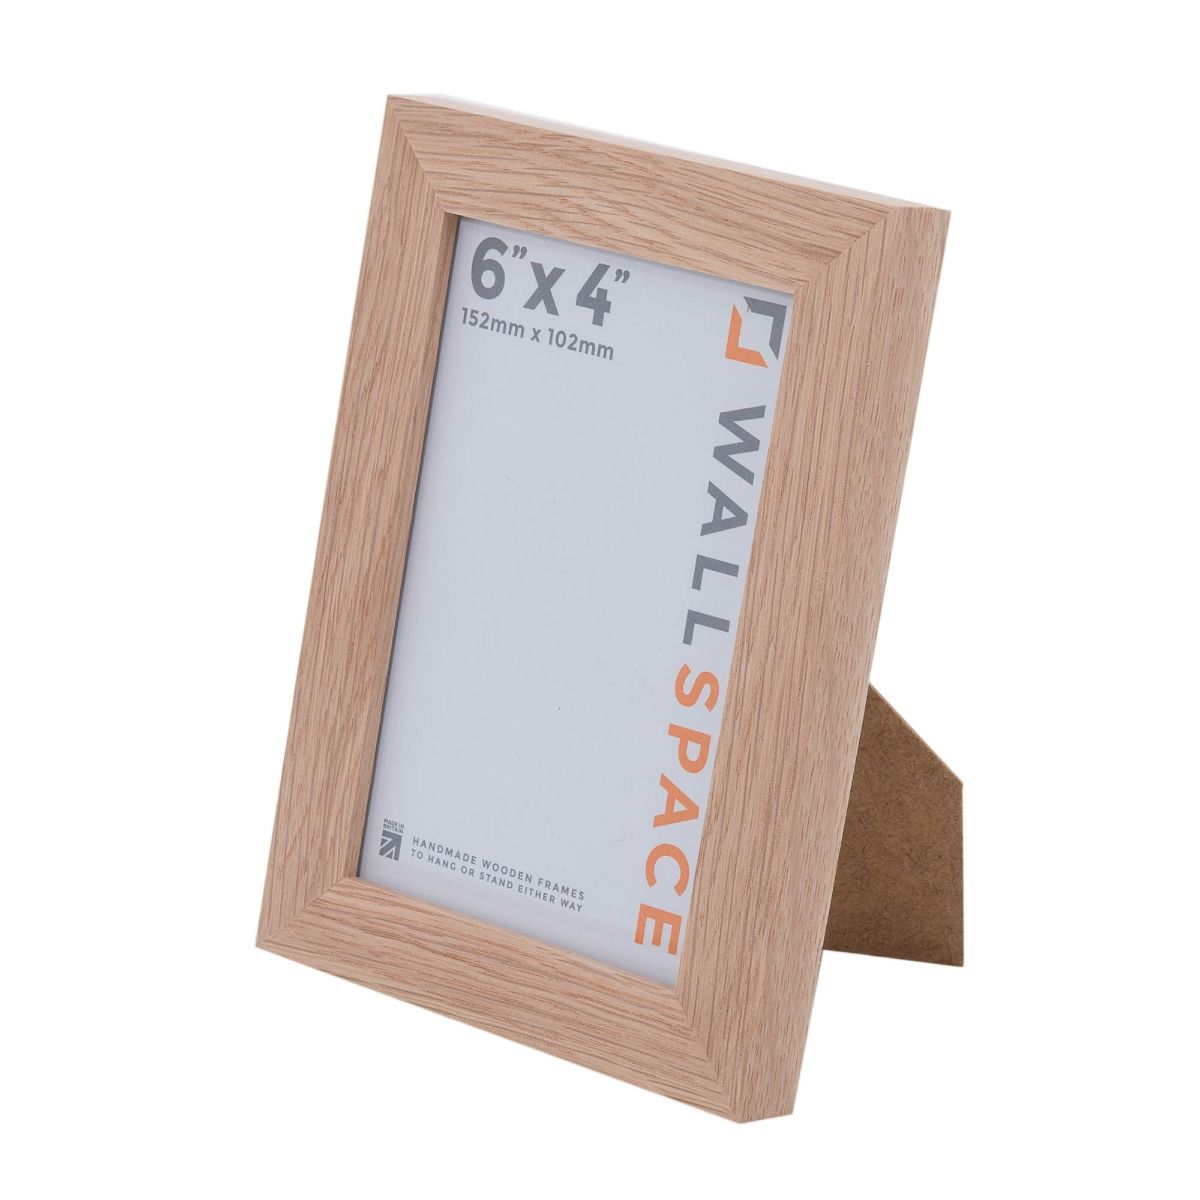 Solid Oak Photo Frame - 6 x 4 - Trade Prices, Buy Online!